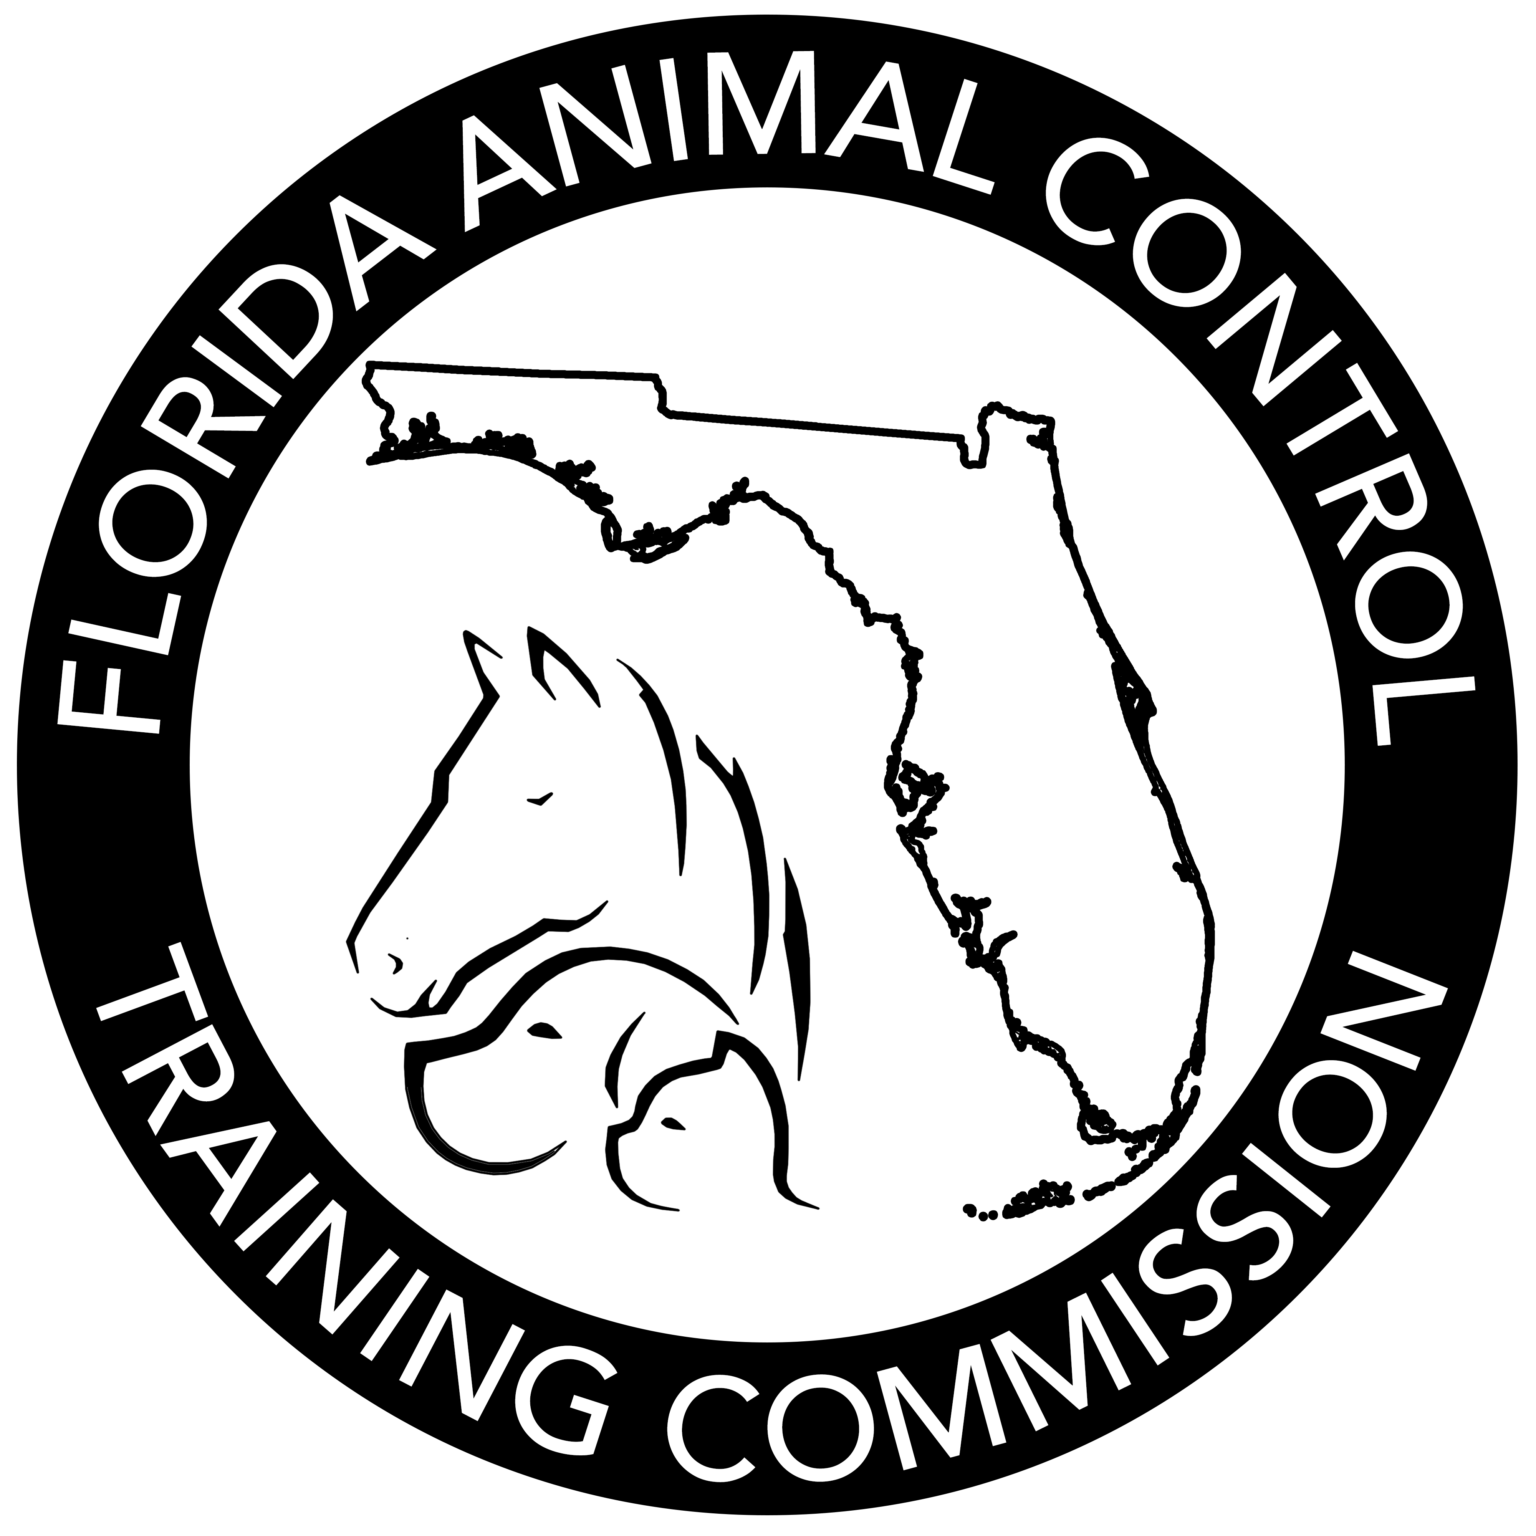 Florida Animal Control Training Commission Certification Training For